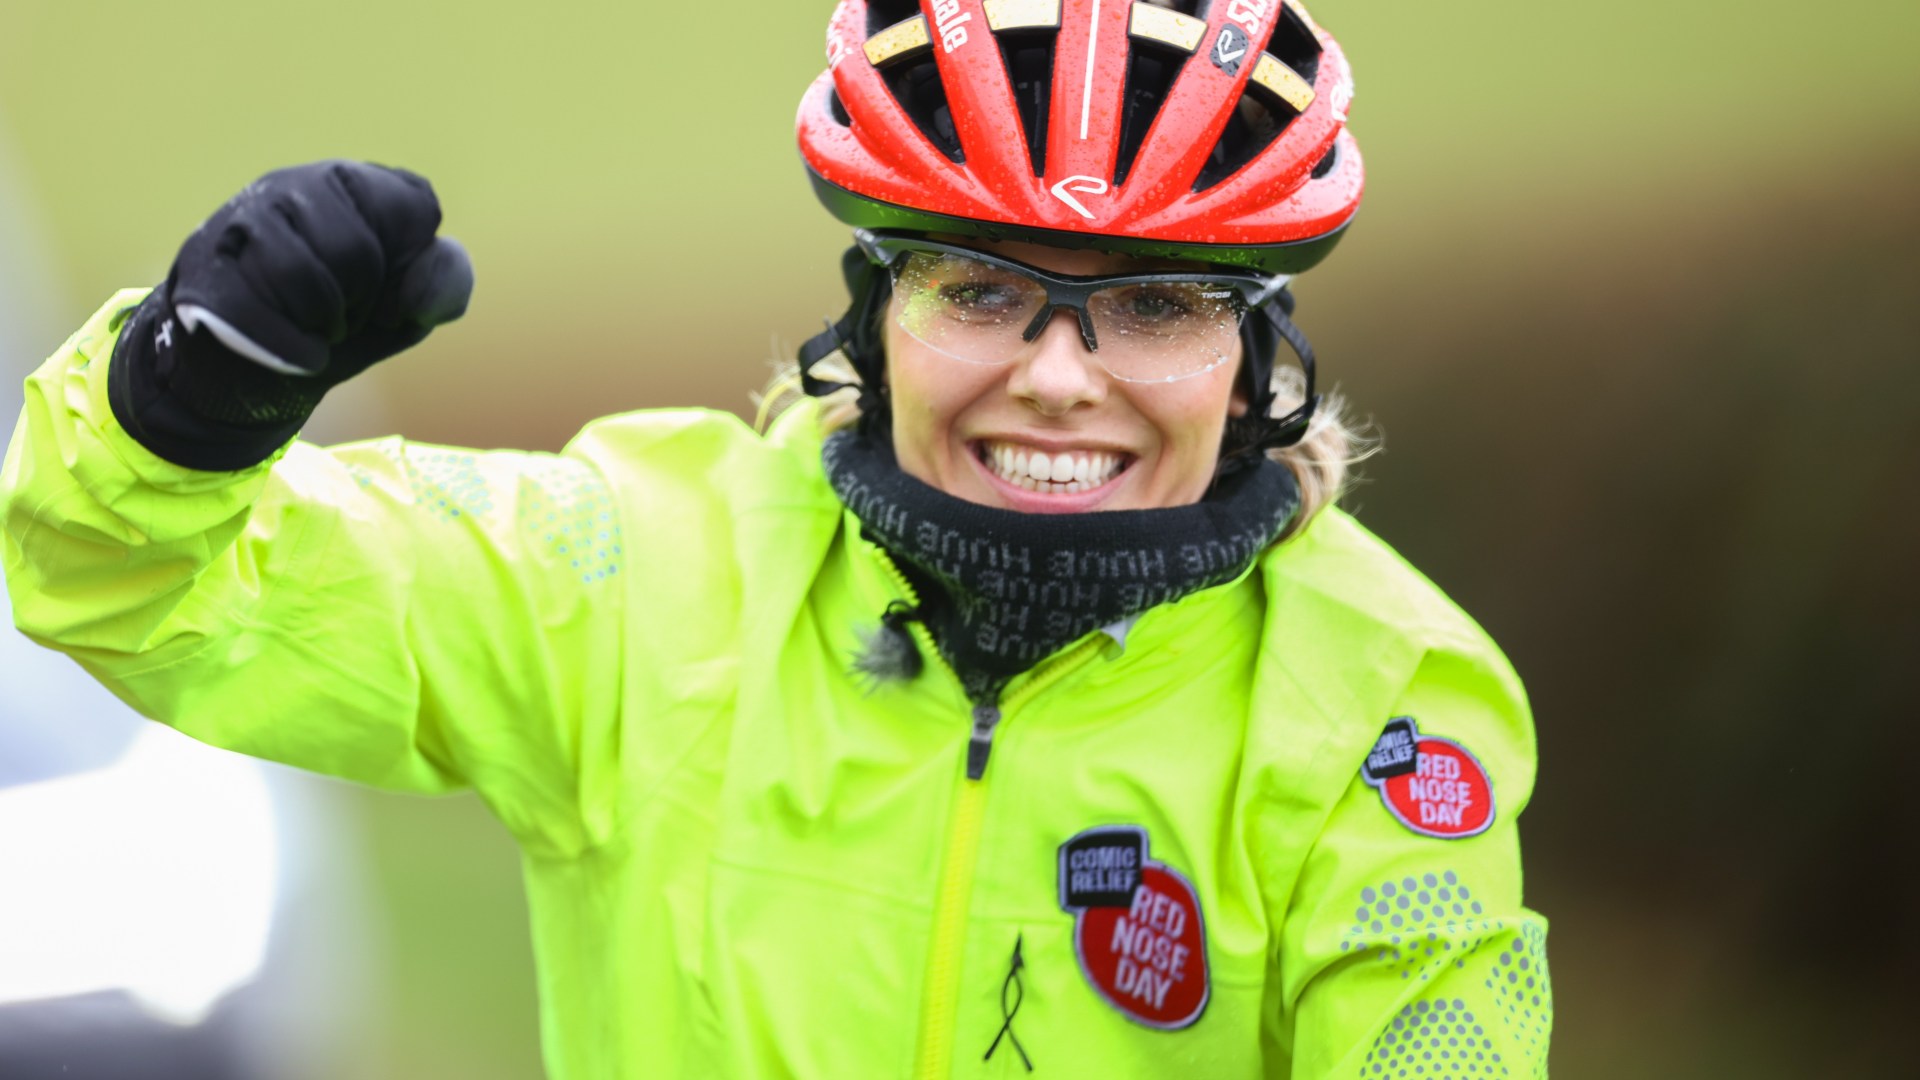 Follow Mollie King’s Charity Cycling Journey with Red Nose Day’s Pedal Power Route Tracker!